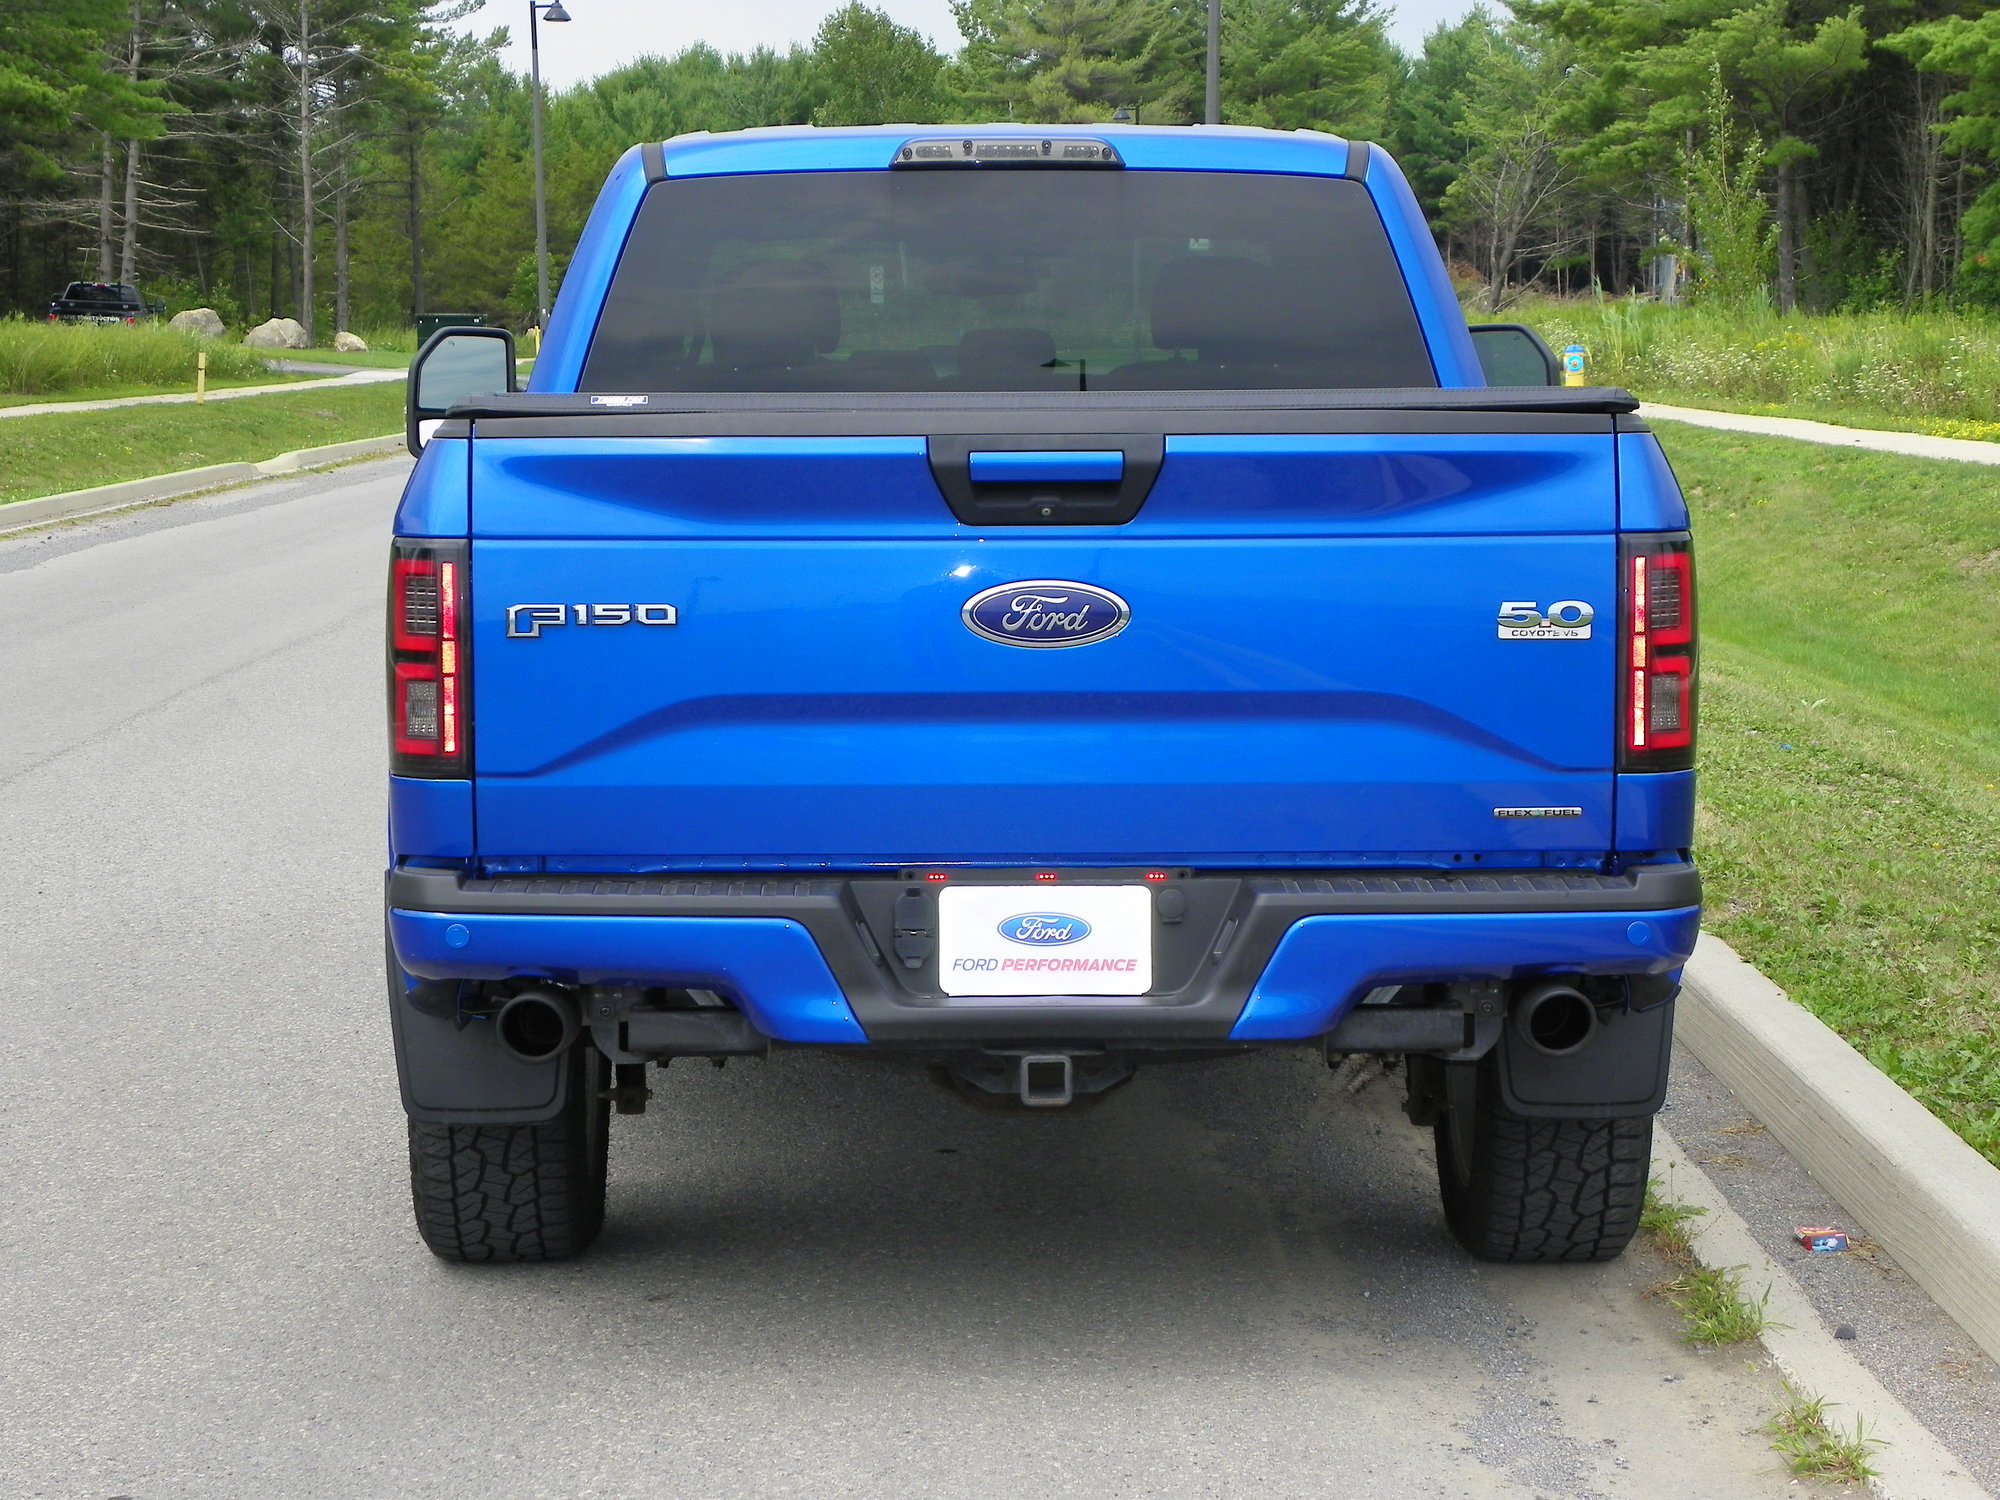 2019 Limited Rear Bumper Page 9 Ford F150 Forum Community Of Ford Truck Fans